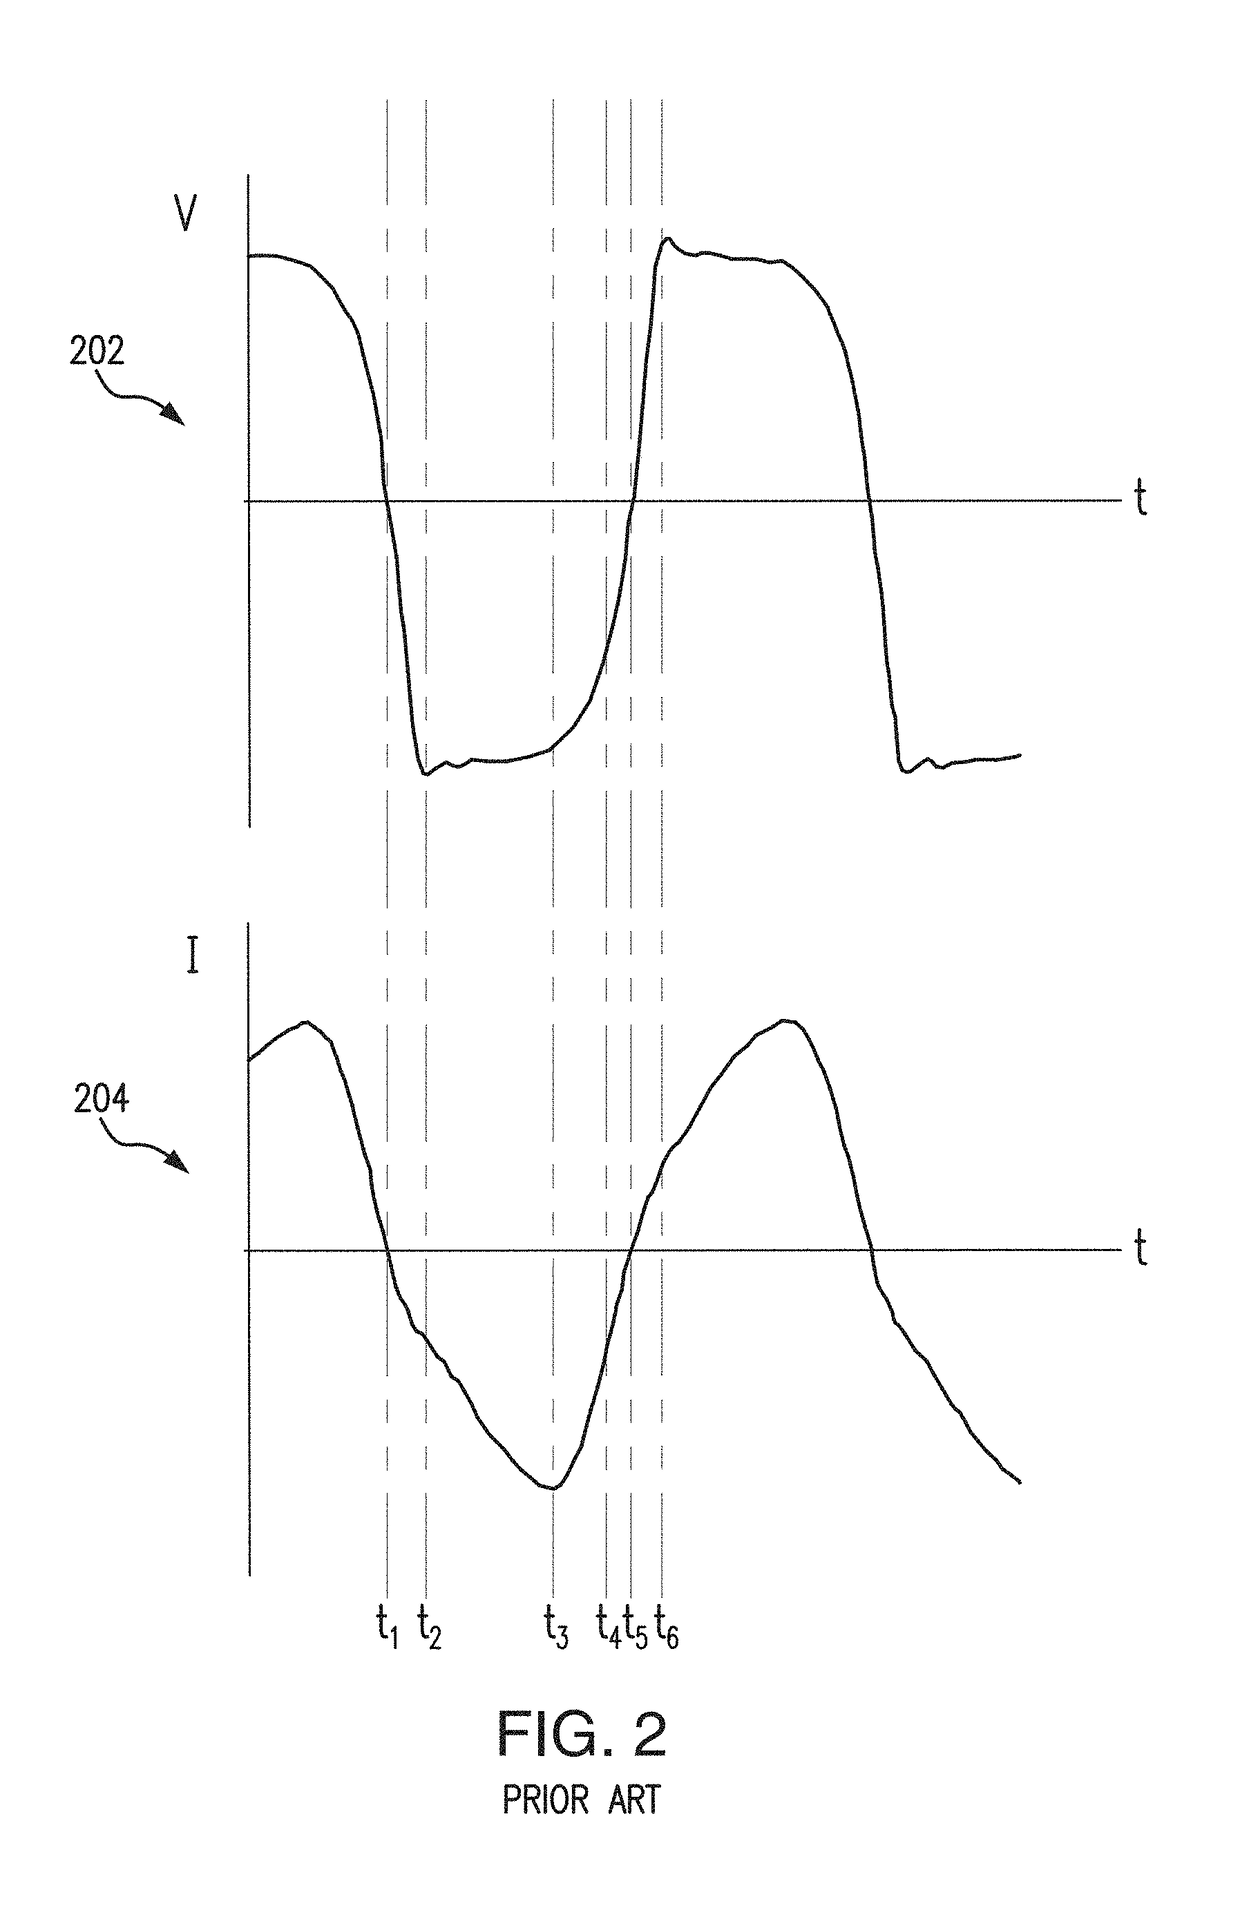 Plasma device driven by multiple-phase alternating or pulsed electrical current